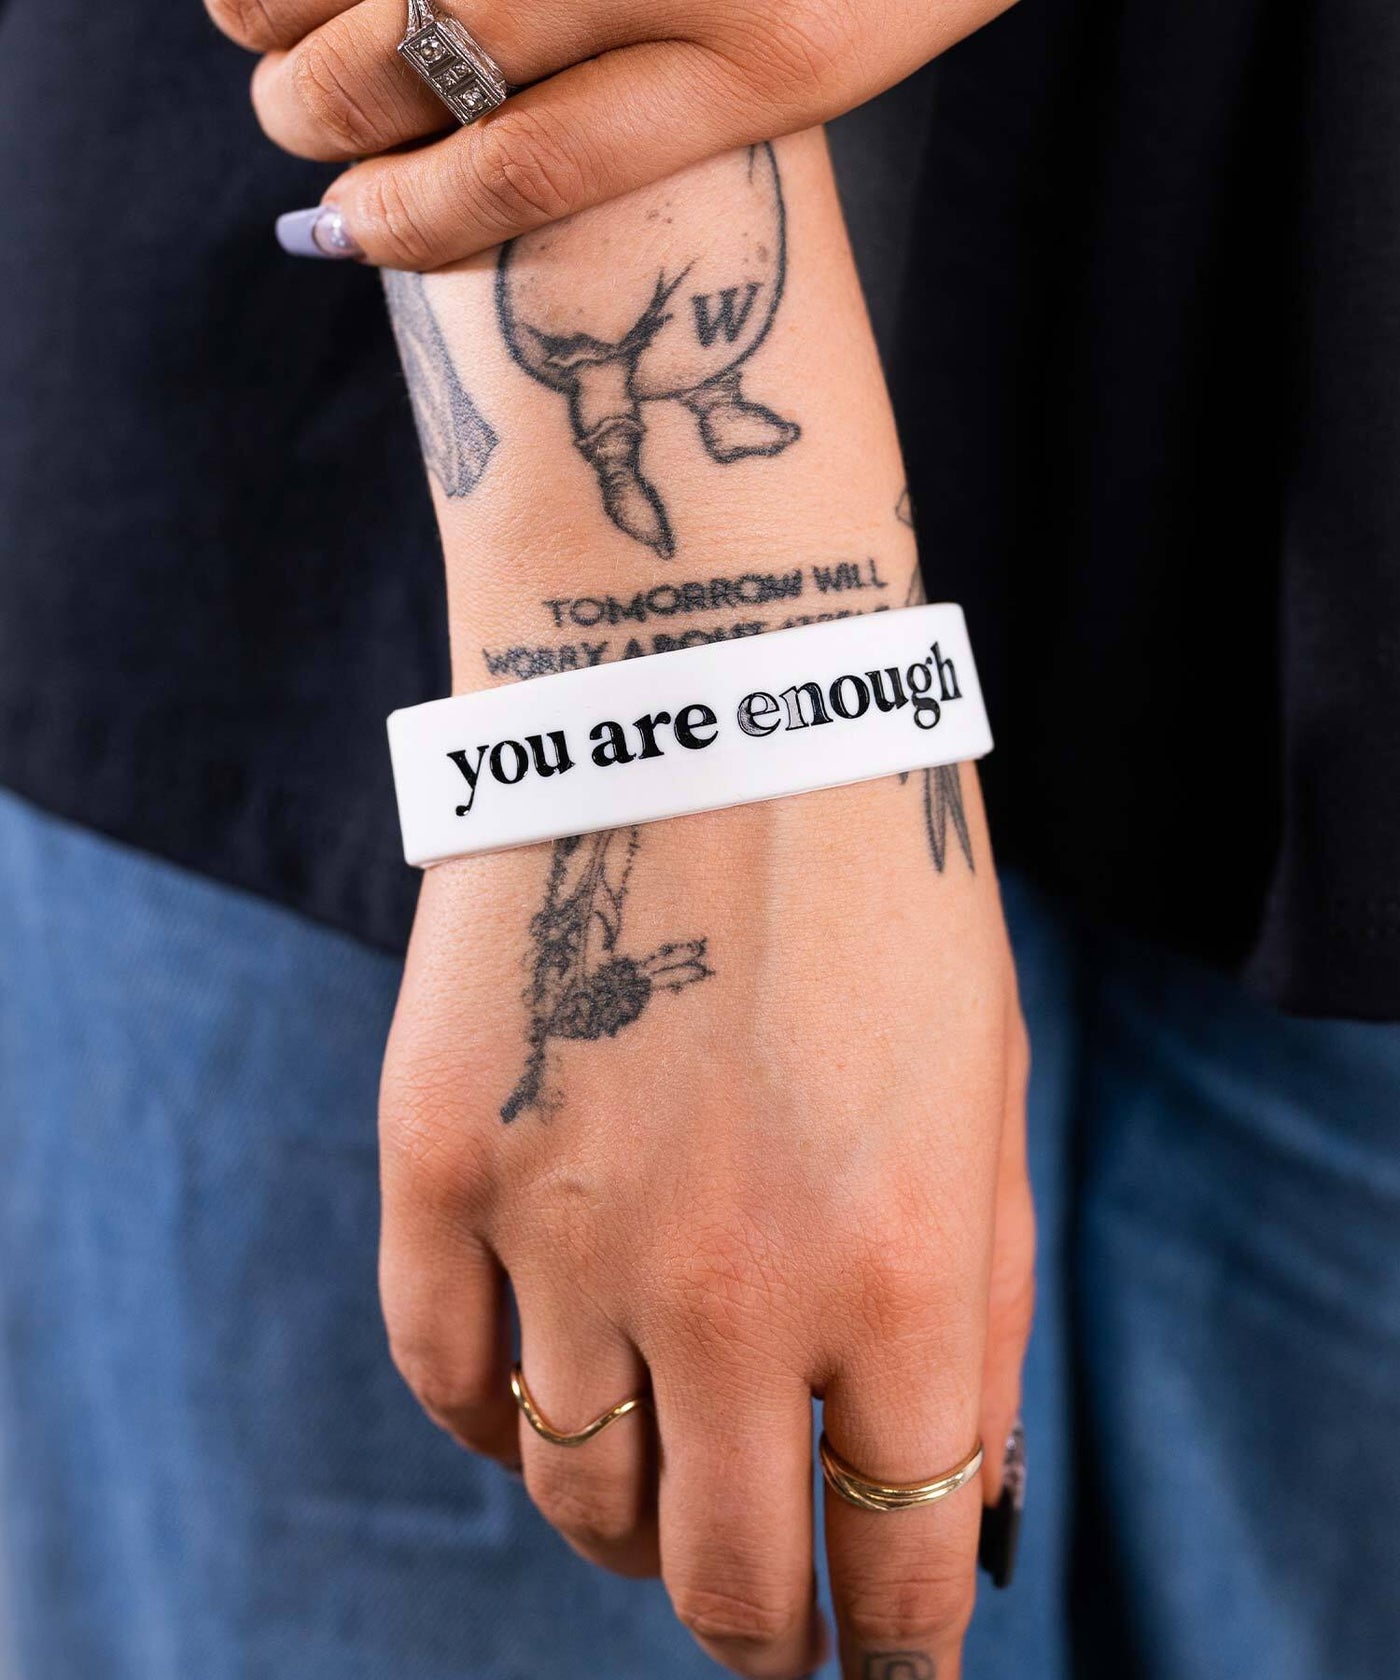 You Are Enough Silicone Bracelet